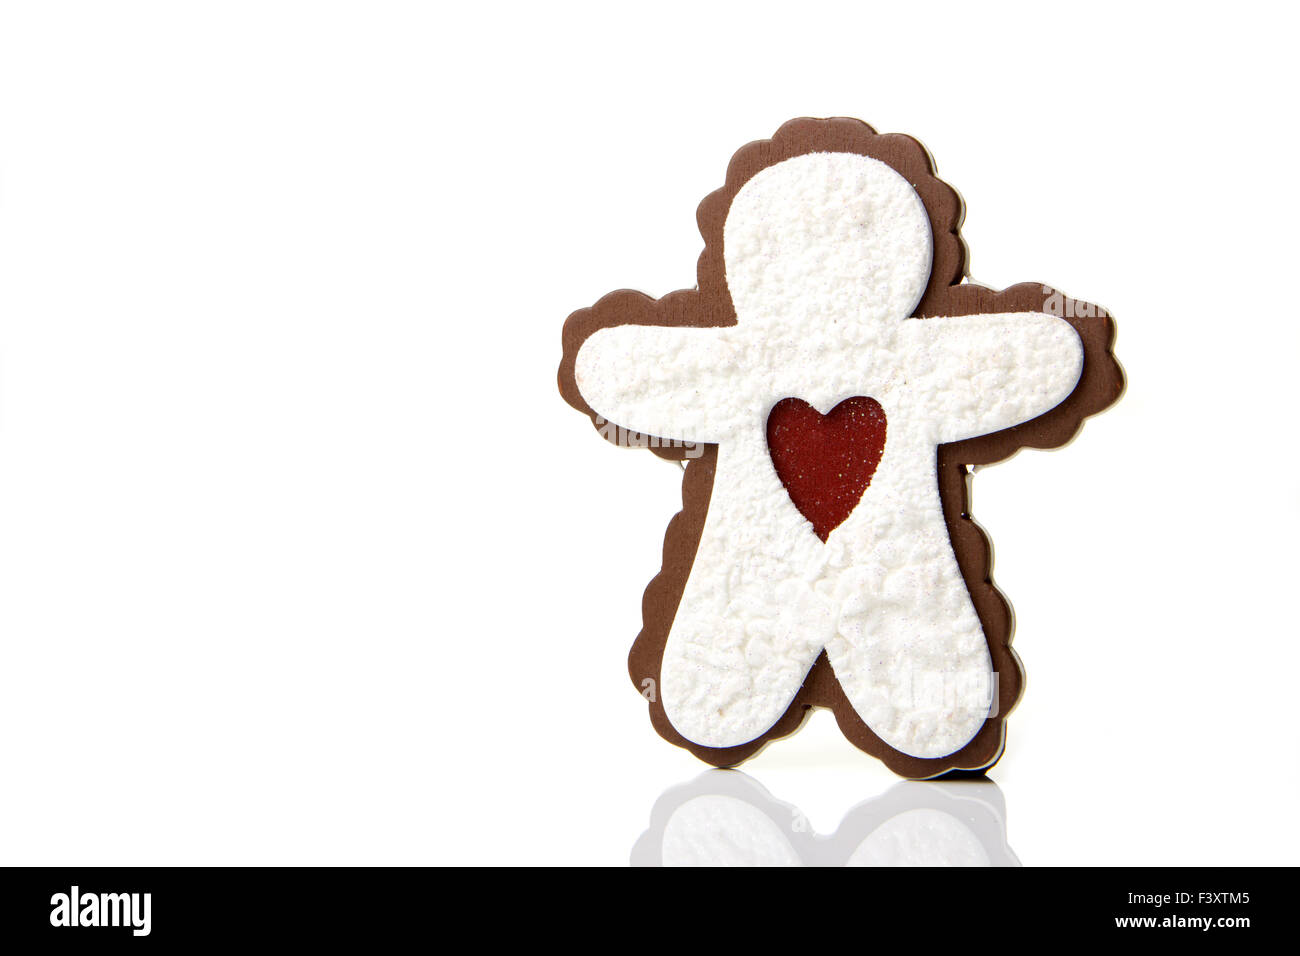 Gingerbread Man as a Christmas decoration Stock Photo